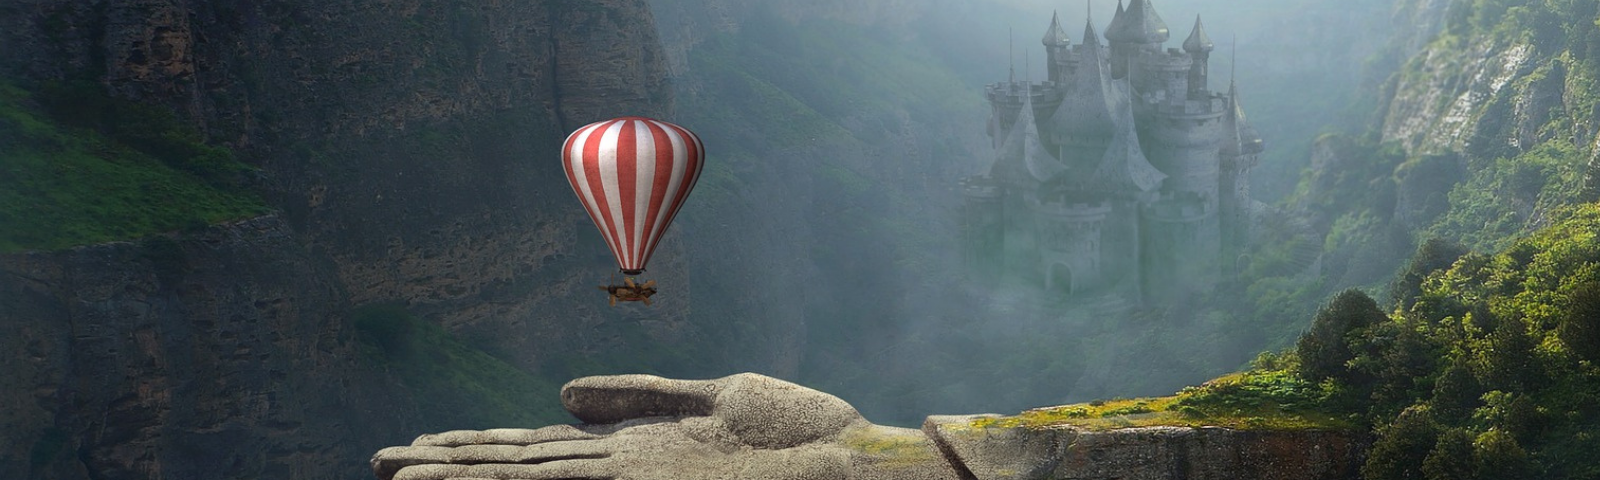 Hot air balloon landing on giant stone hand - ”Welcome New Writers” by “Arthur G. Hernandez”